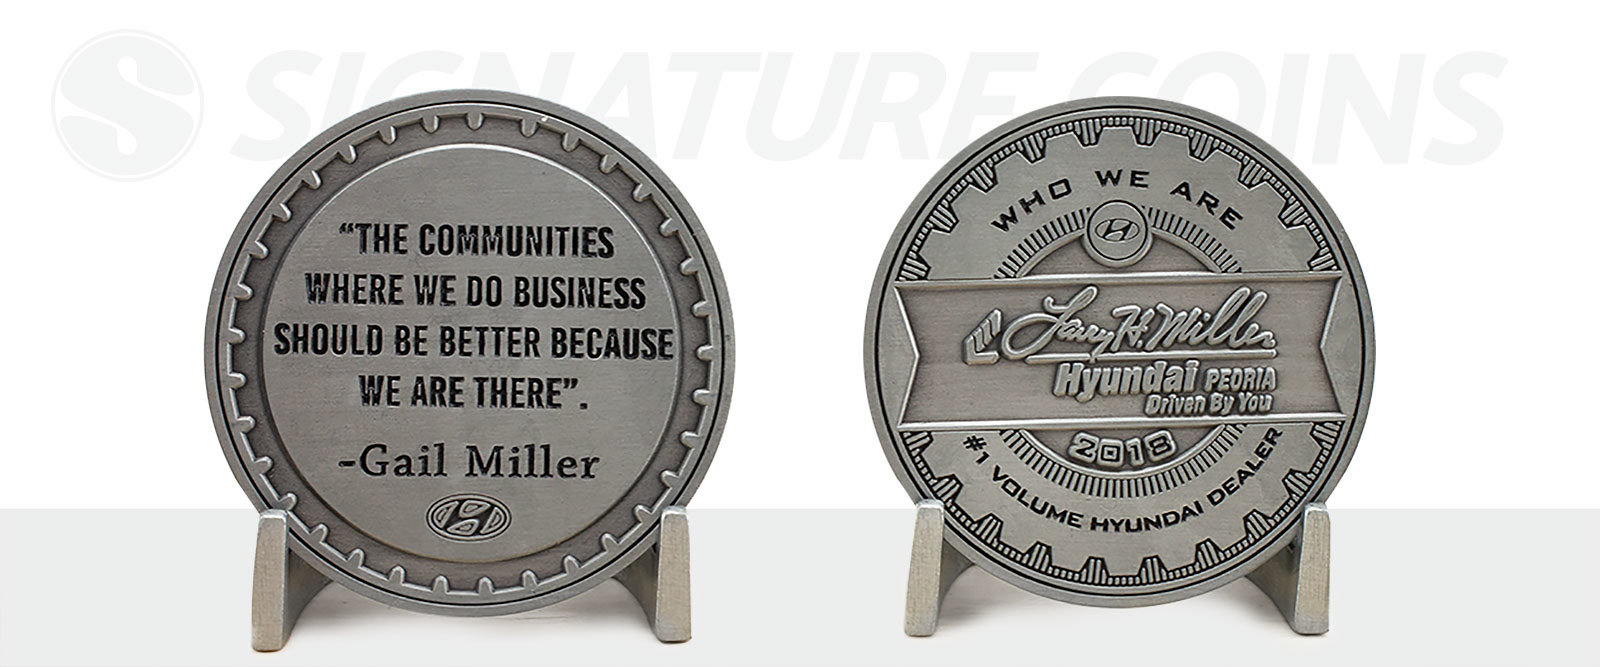 Elite Custom Coins - Customizable Challenge Coin Maker - Military Coins & More